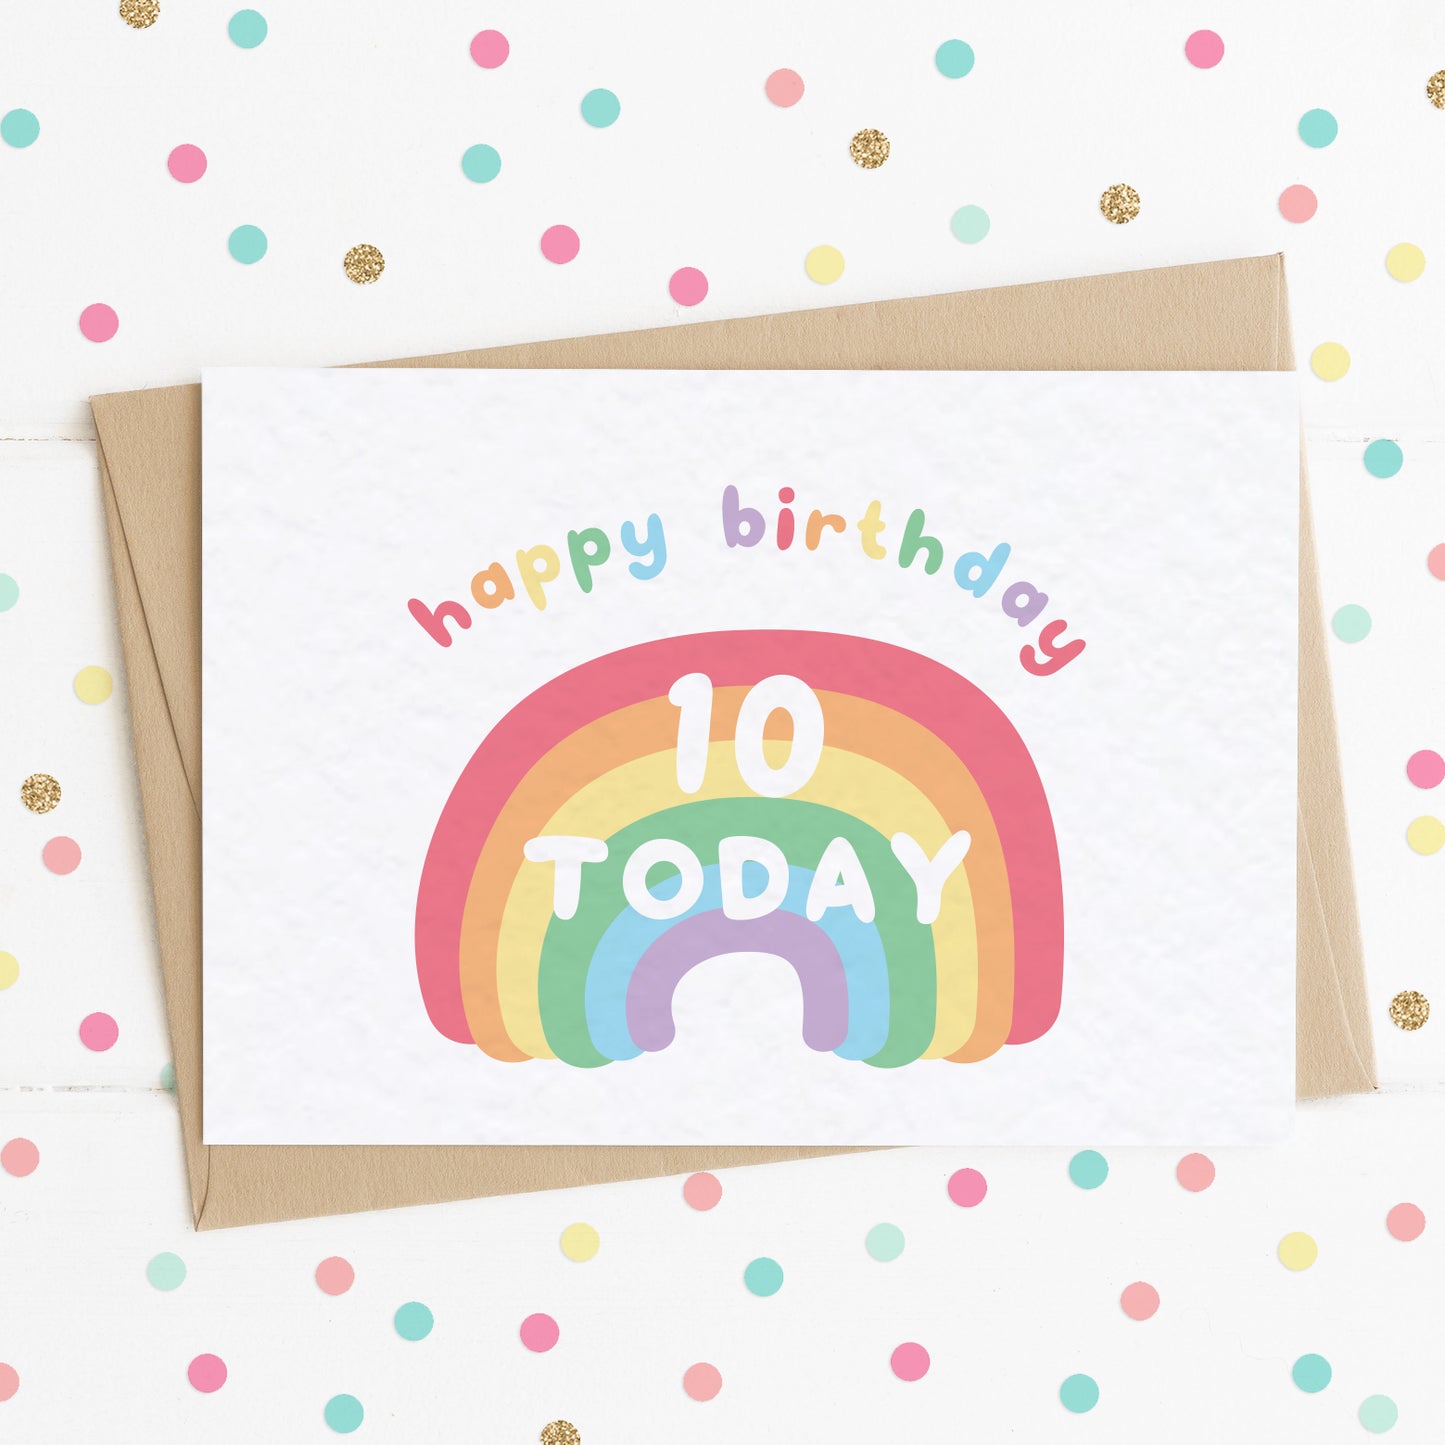 A cute milestone age birthday card with a smiling happy rainbow on it and the message "HAPPY BIRTHDAY - 10 TODAY".